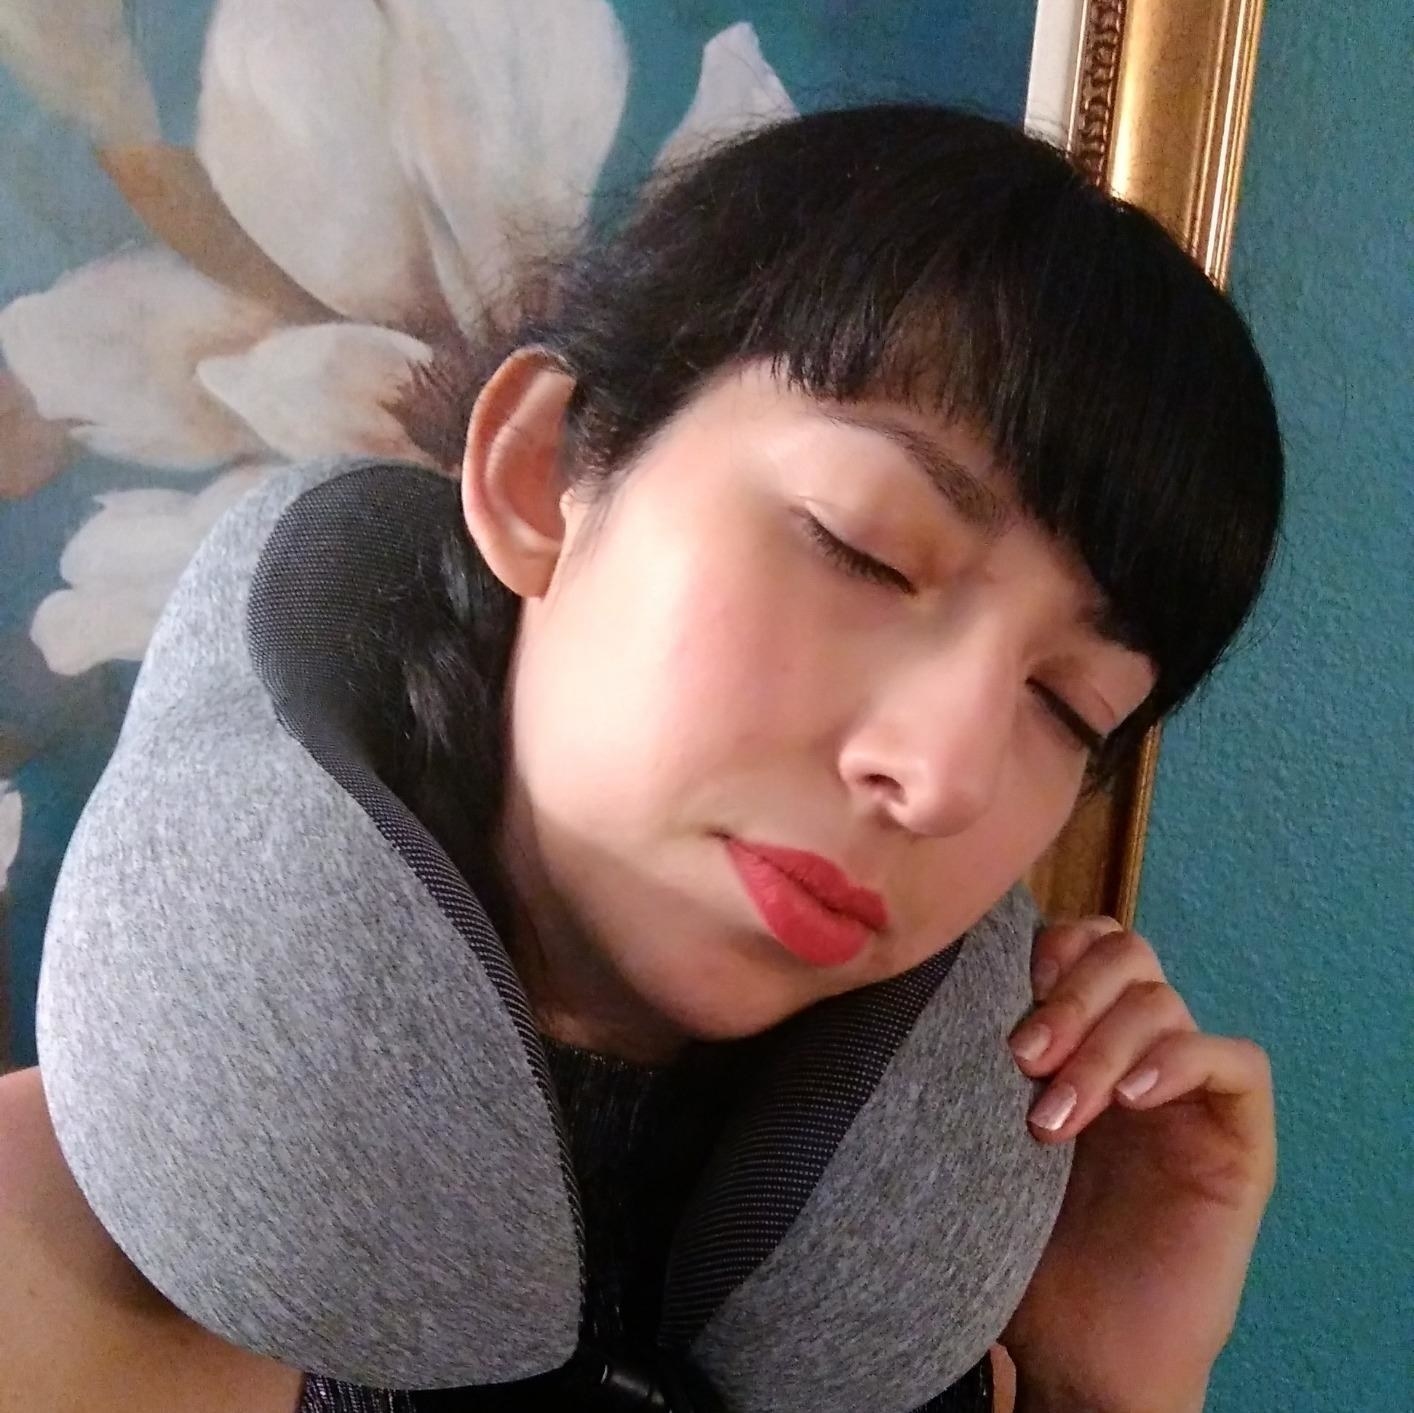 Reviewer pretending to sleep with the pillow around their neck